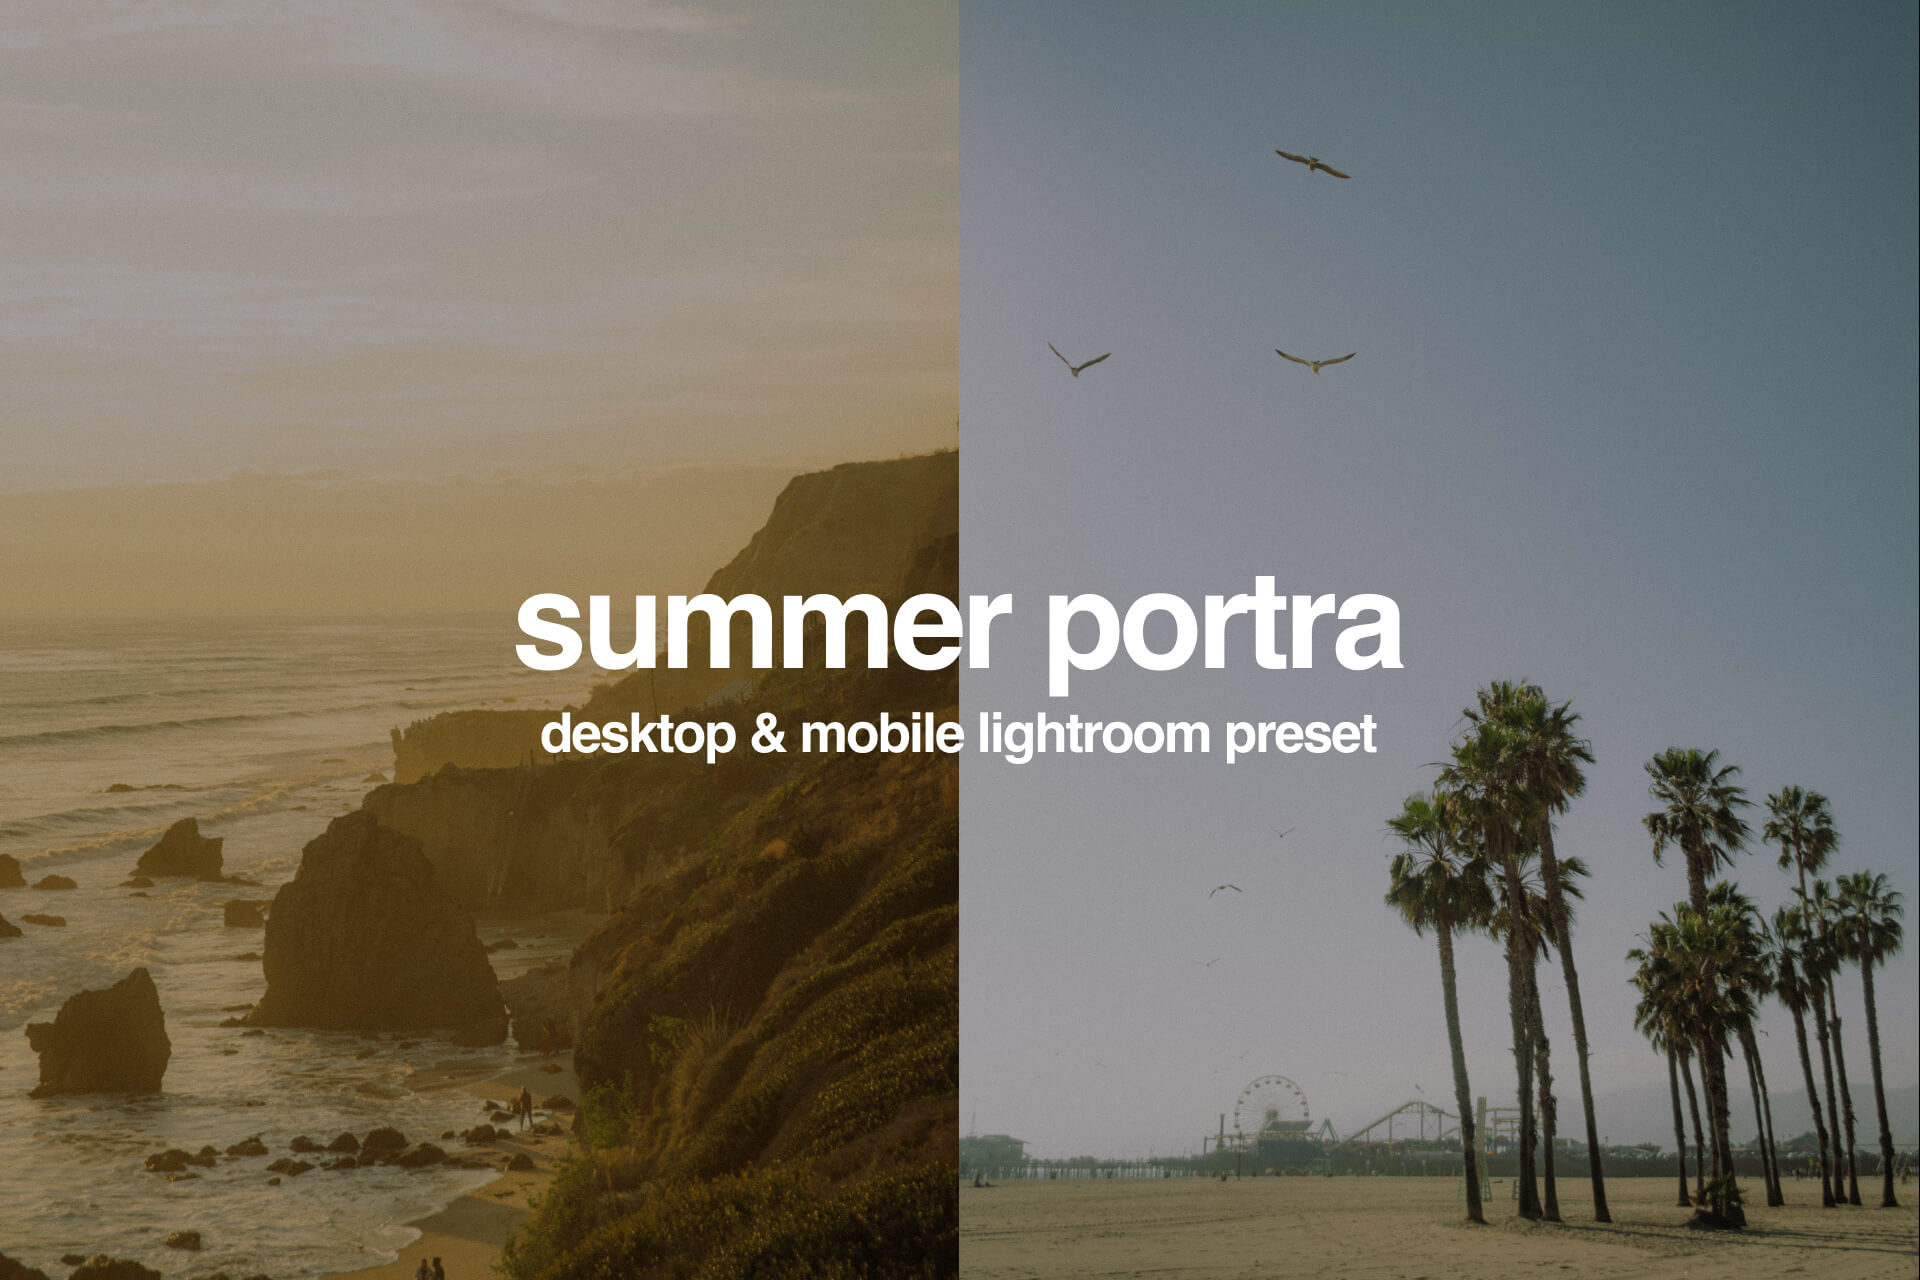 Free Summer Portra Presets for Weddings